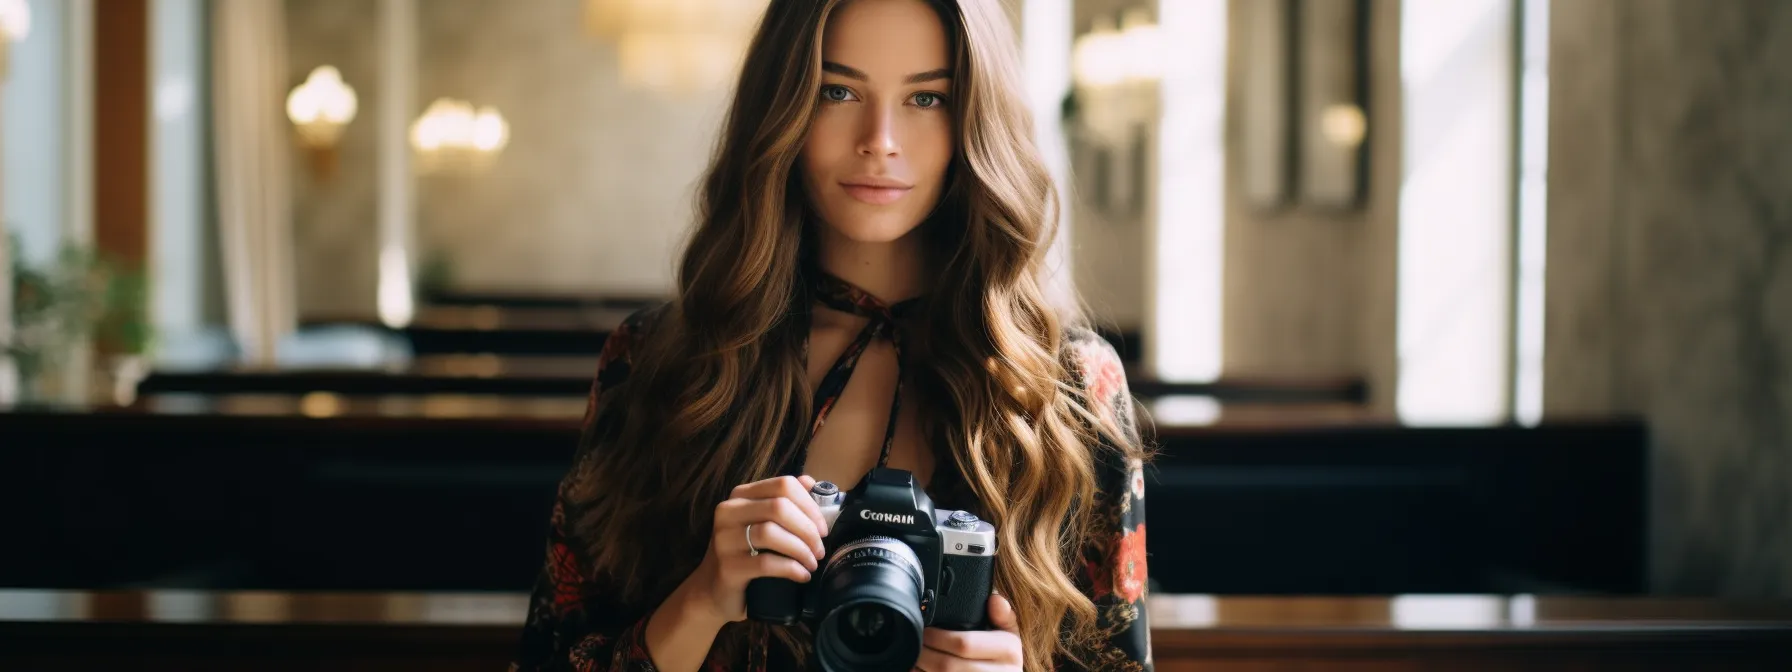 fashion blogger holding a high-quality image while collaborating with influencers to drive traffic and gain high-authority backlinks.